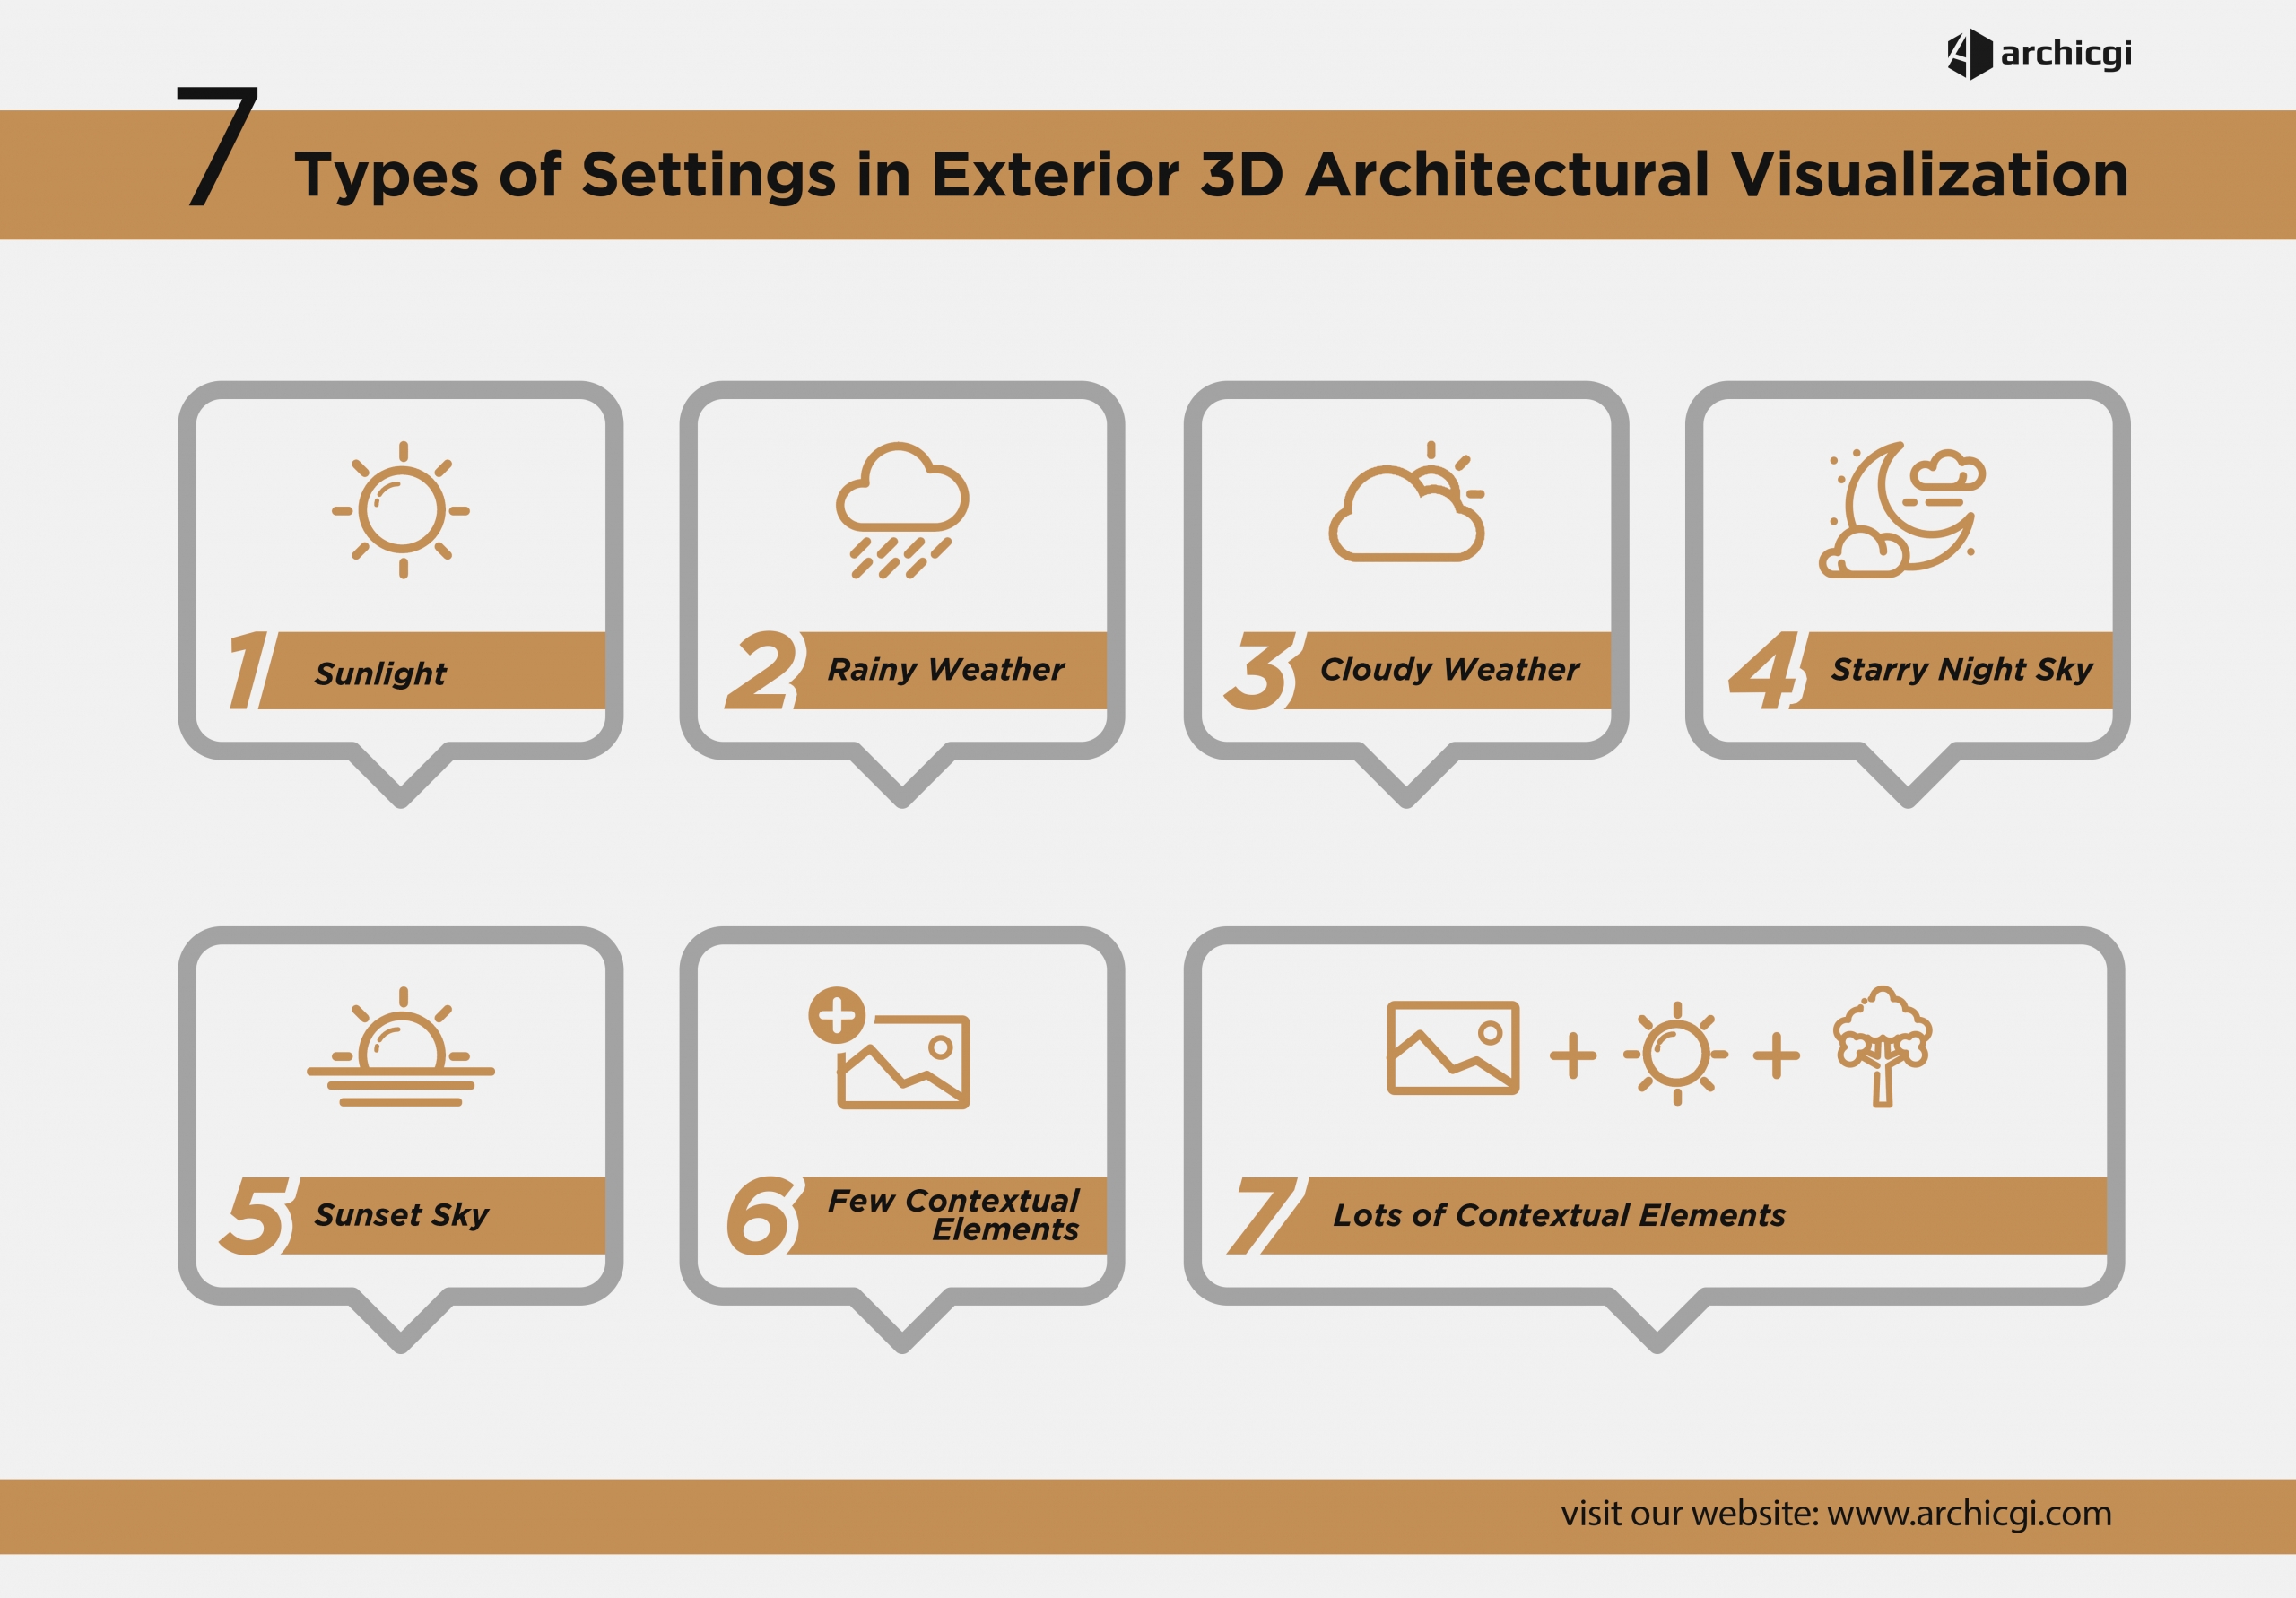 7 Types of Settings for Exterior CGI